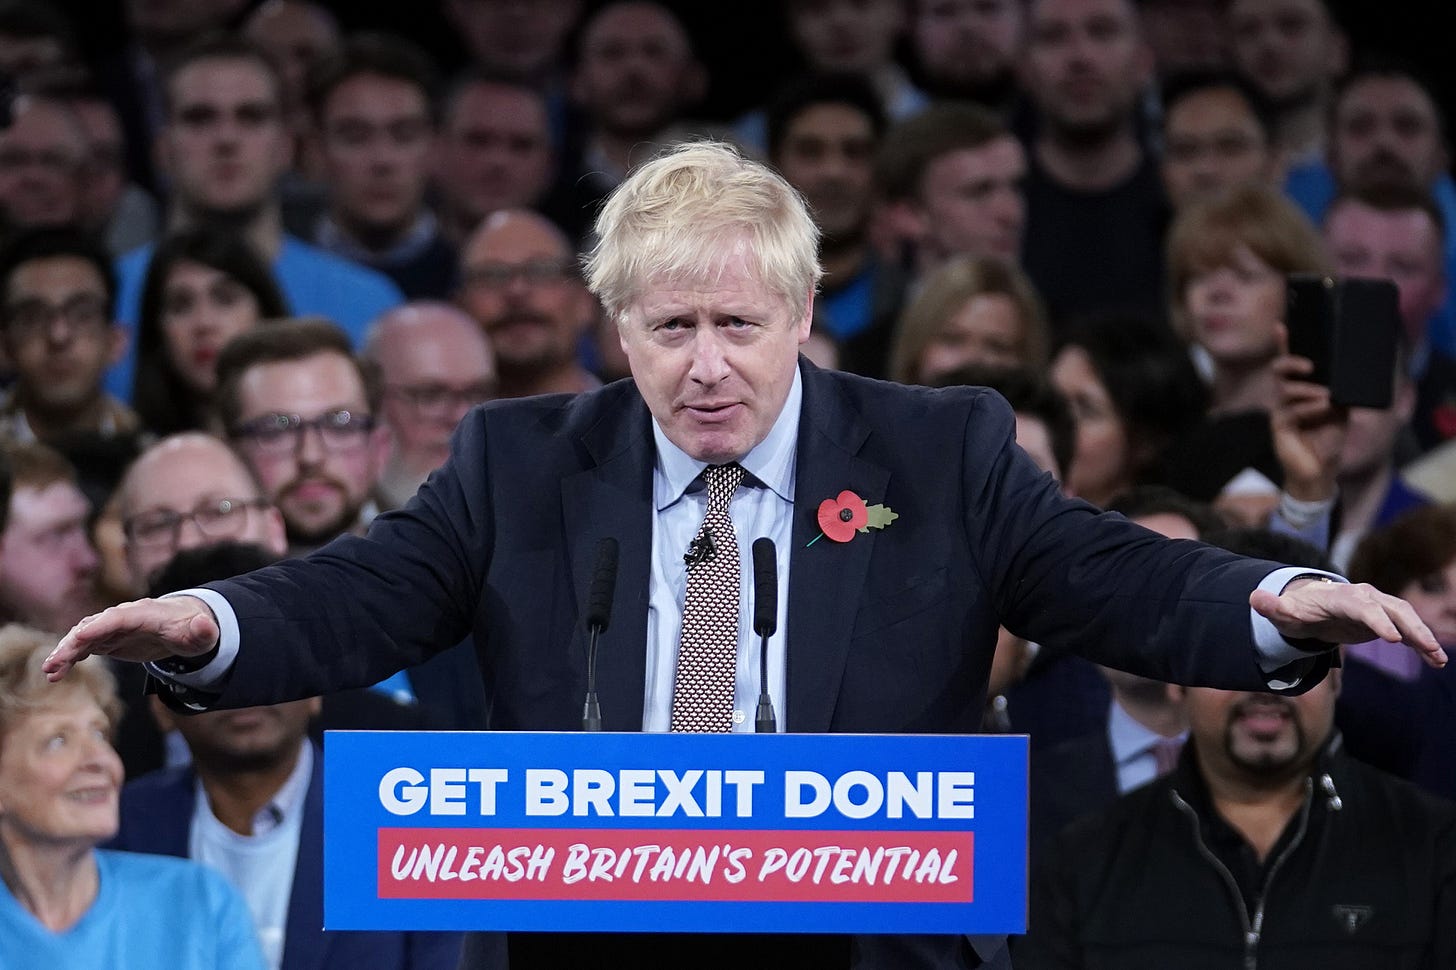 Twitter Reacts to Photos Revealing Boris Johnson Rally To Be Much Smaller  Than Portrayed